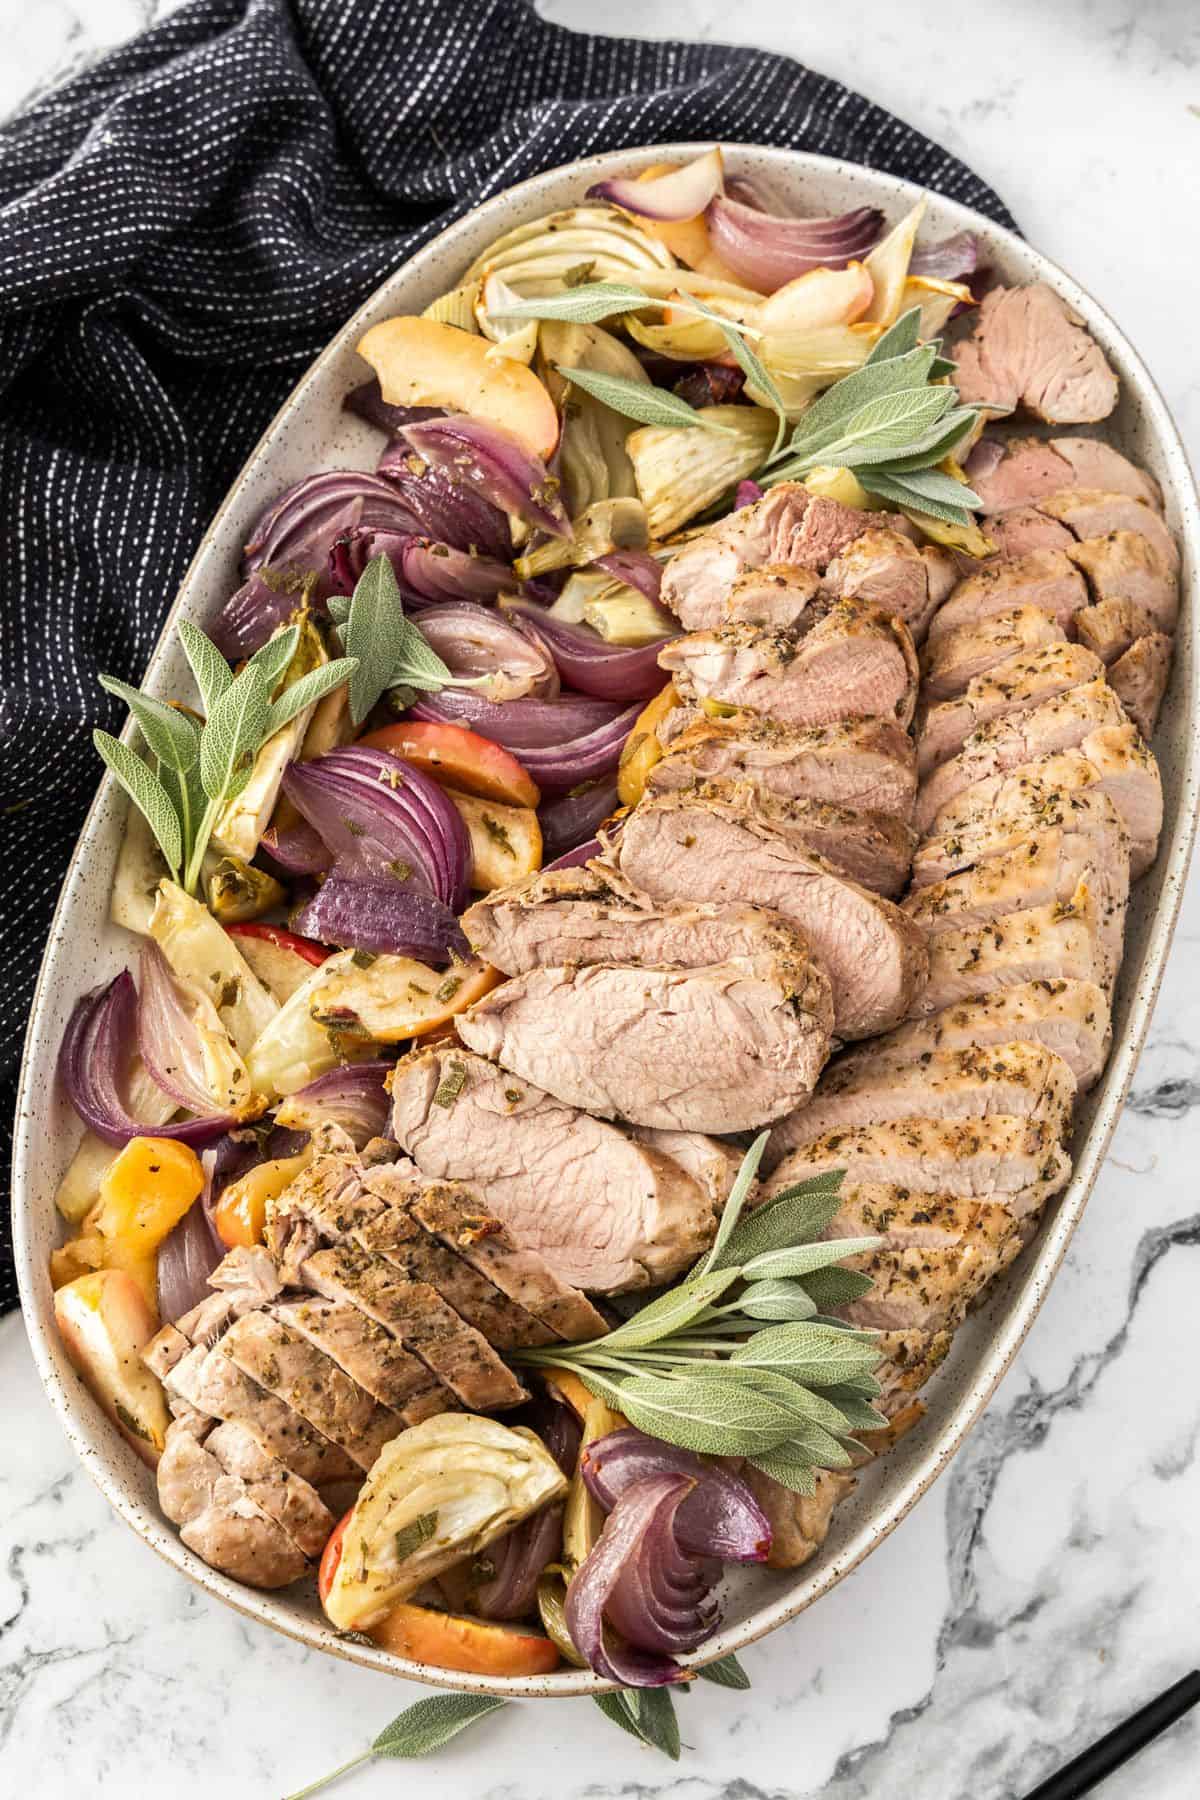 Platter of sliced Roasted Pork Tenderloin, surrounded by pieces of apple, fennel, onion and sage, with a black towel on edge.